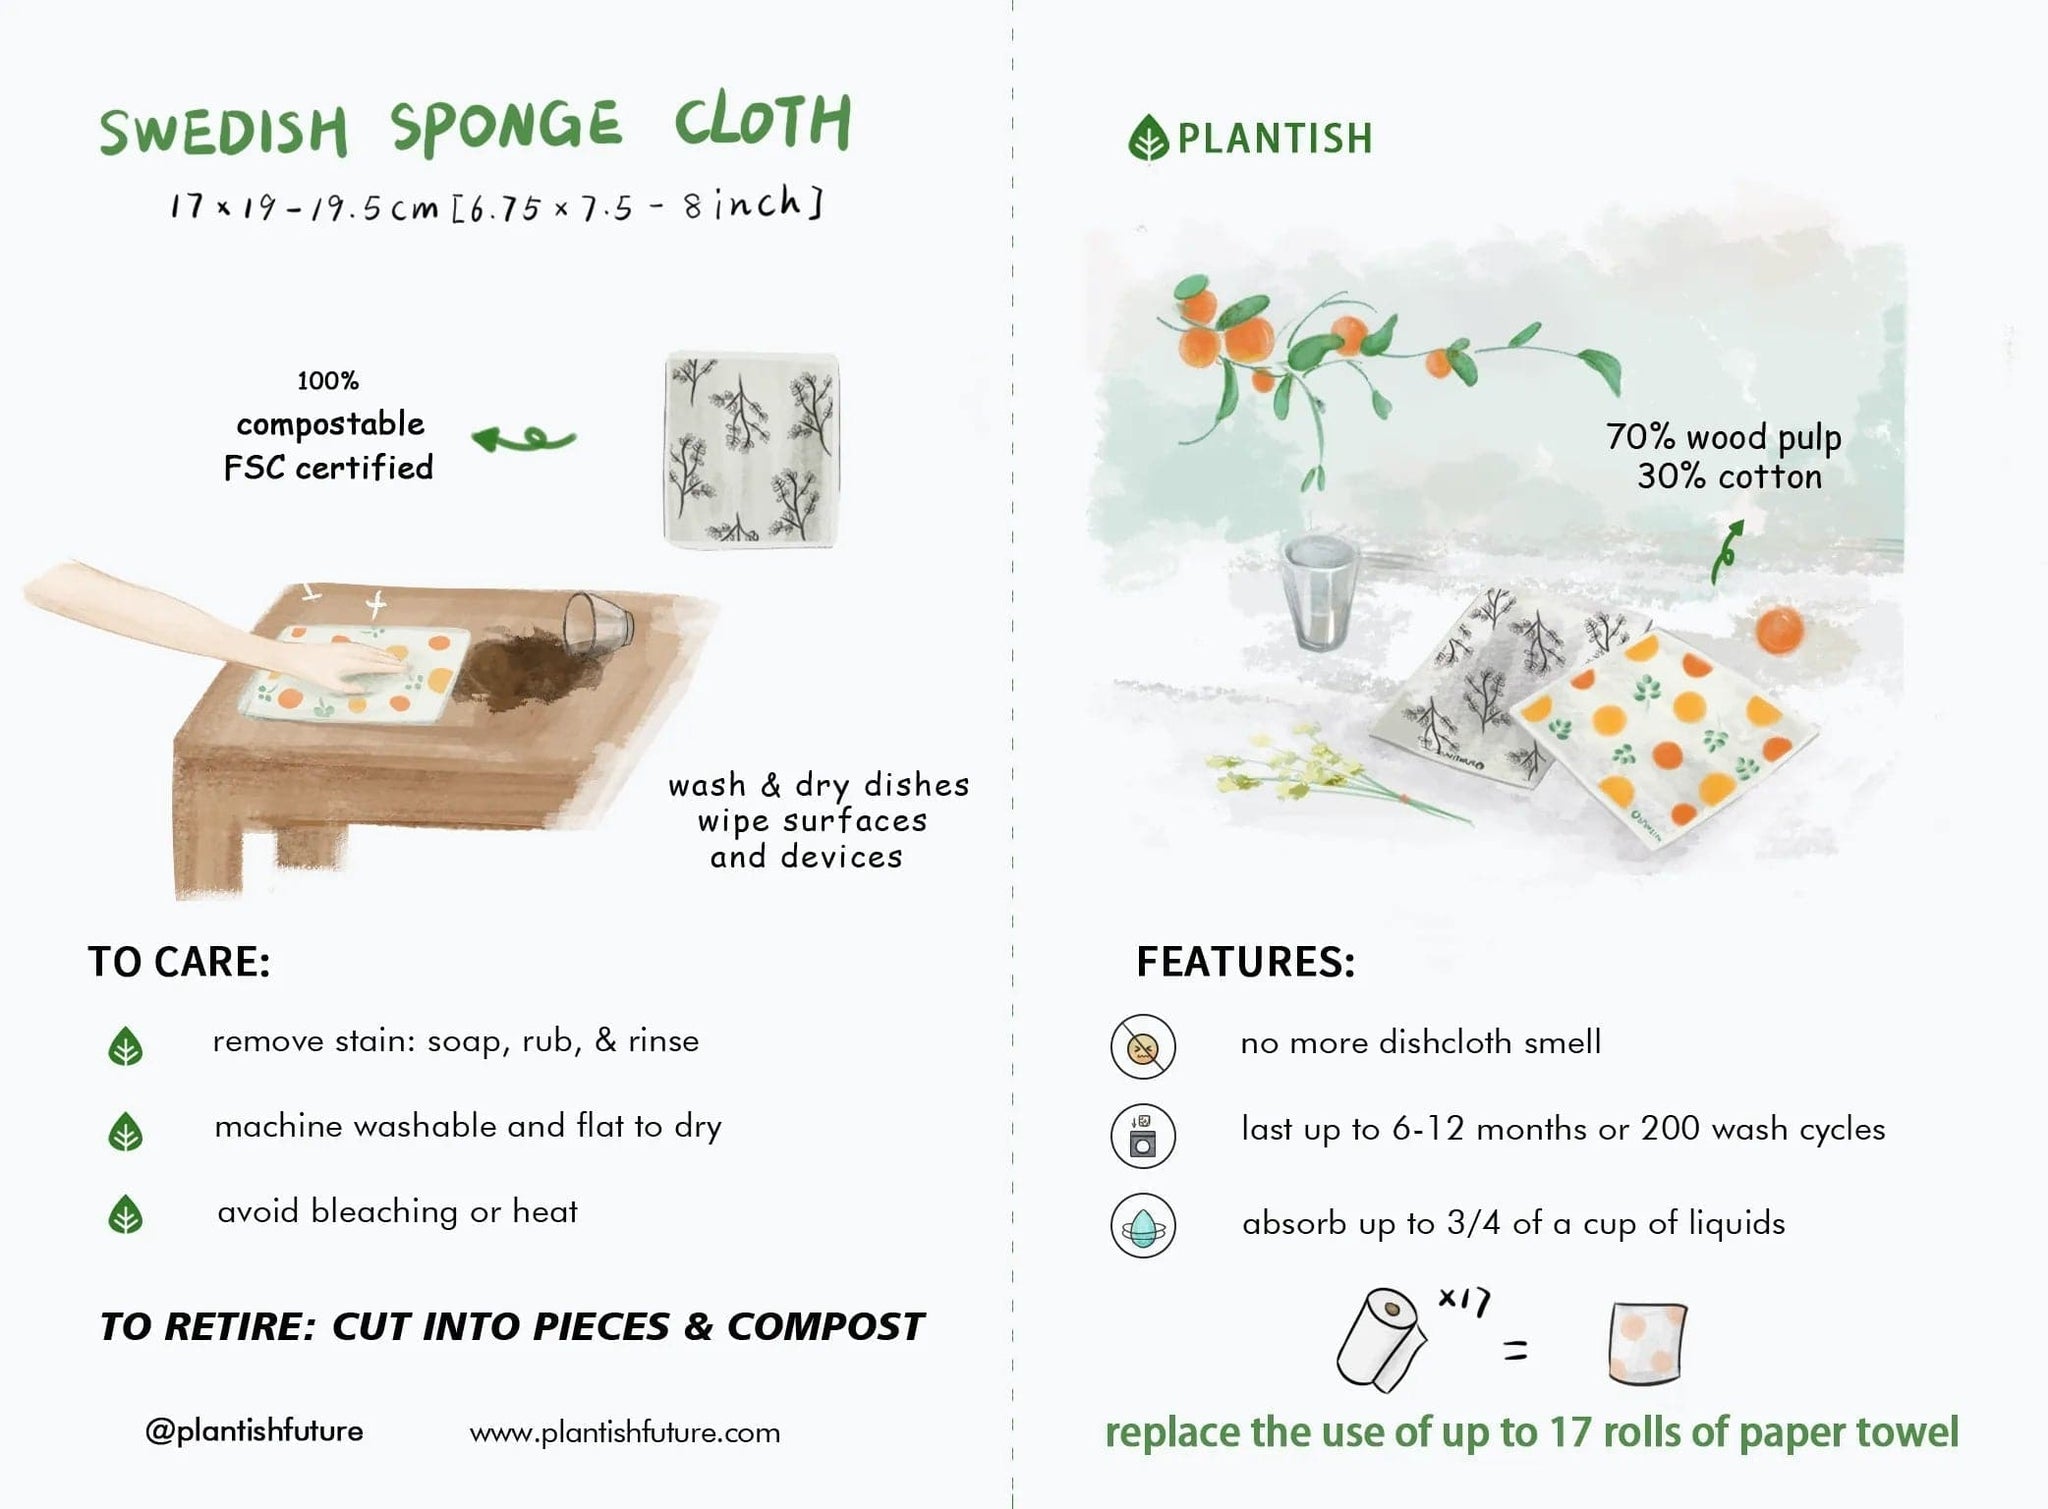 Care tips infographic for Swedish sponge cloths. Made of wood pulp and cotton, 100% compostable and FSC certified.